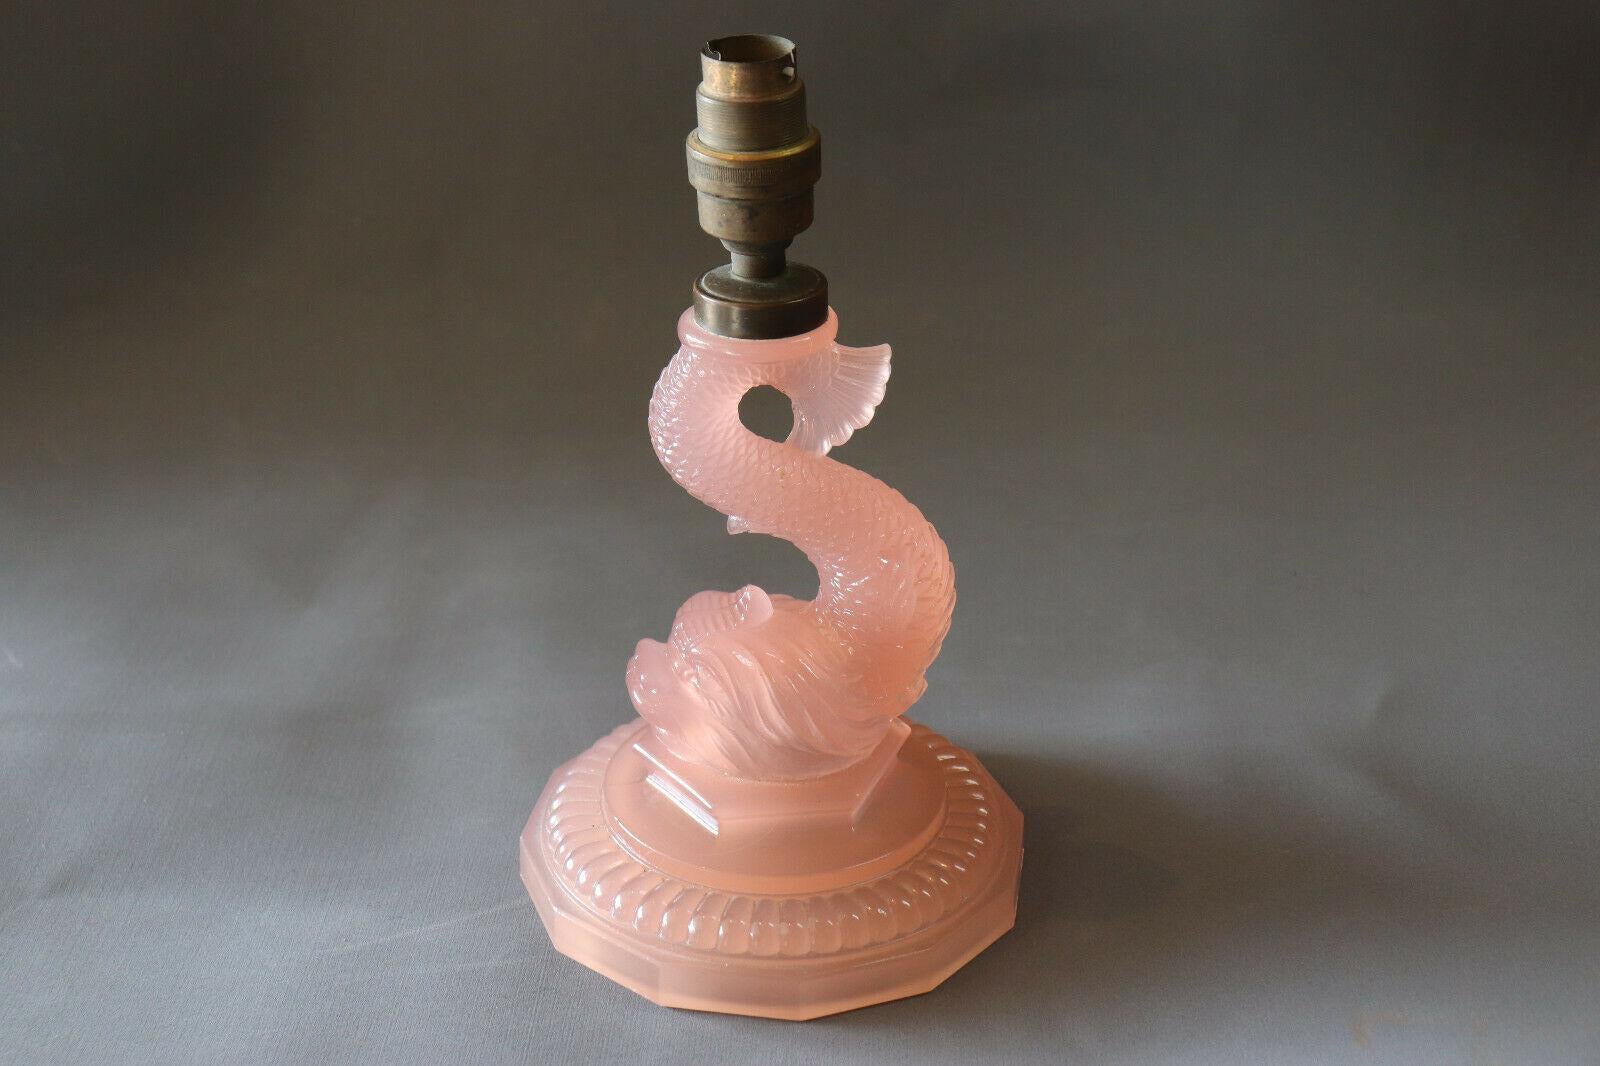 1920s French Art Deco Molded Pink Art Glass Sea Creature/ Dolphin/ Fish Form Table Lamp. This piece is styled after Baccarat. 